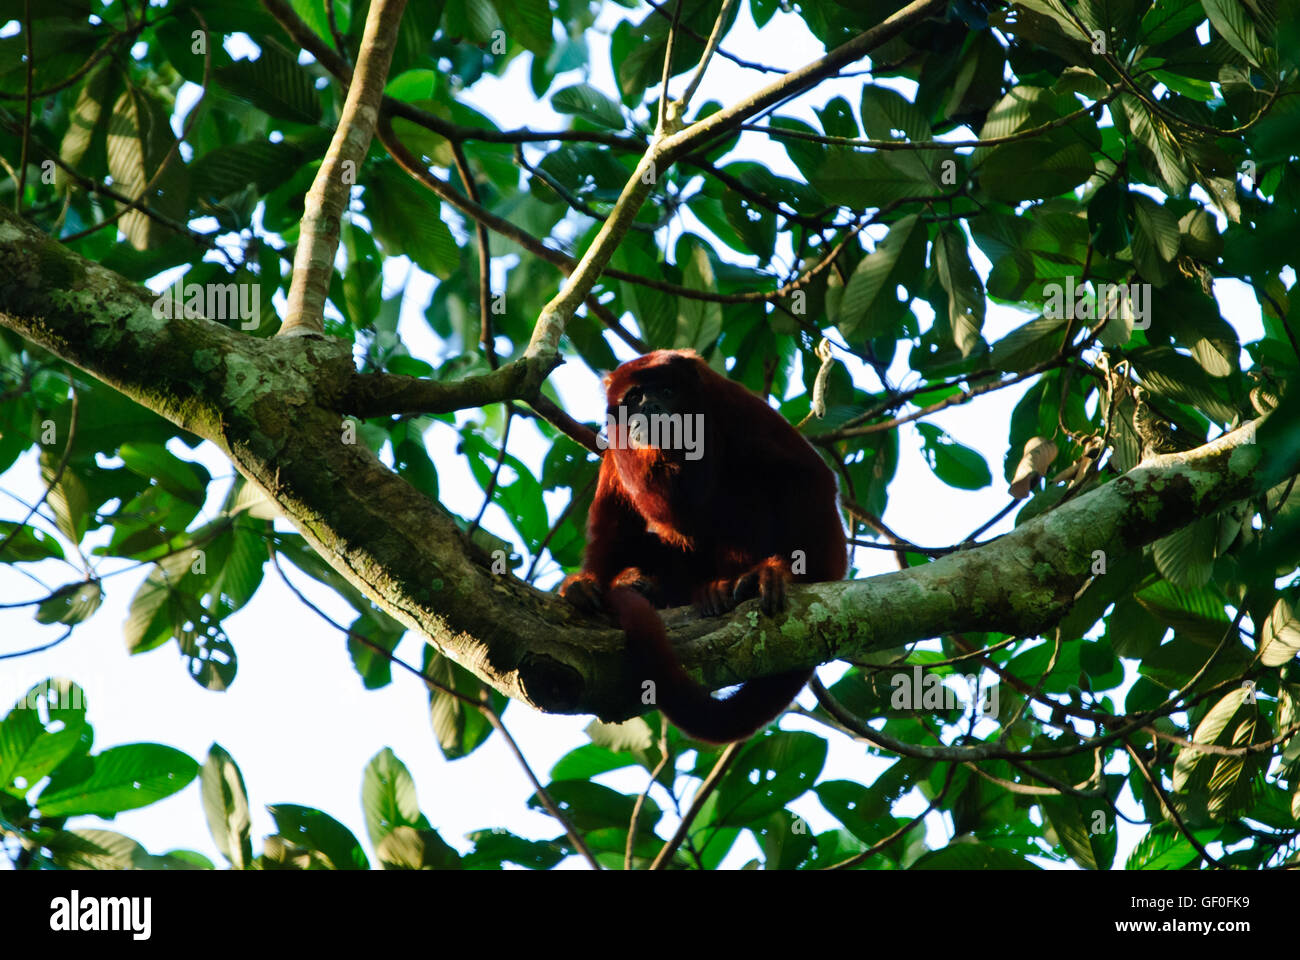 A Red Howler Monkey found in Manu National Park Stock Photo